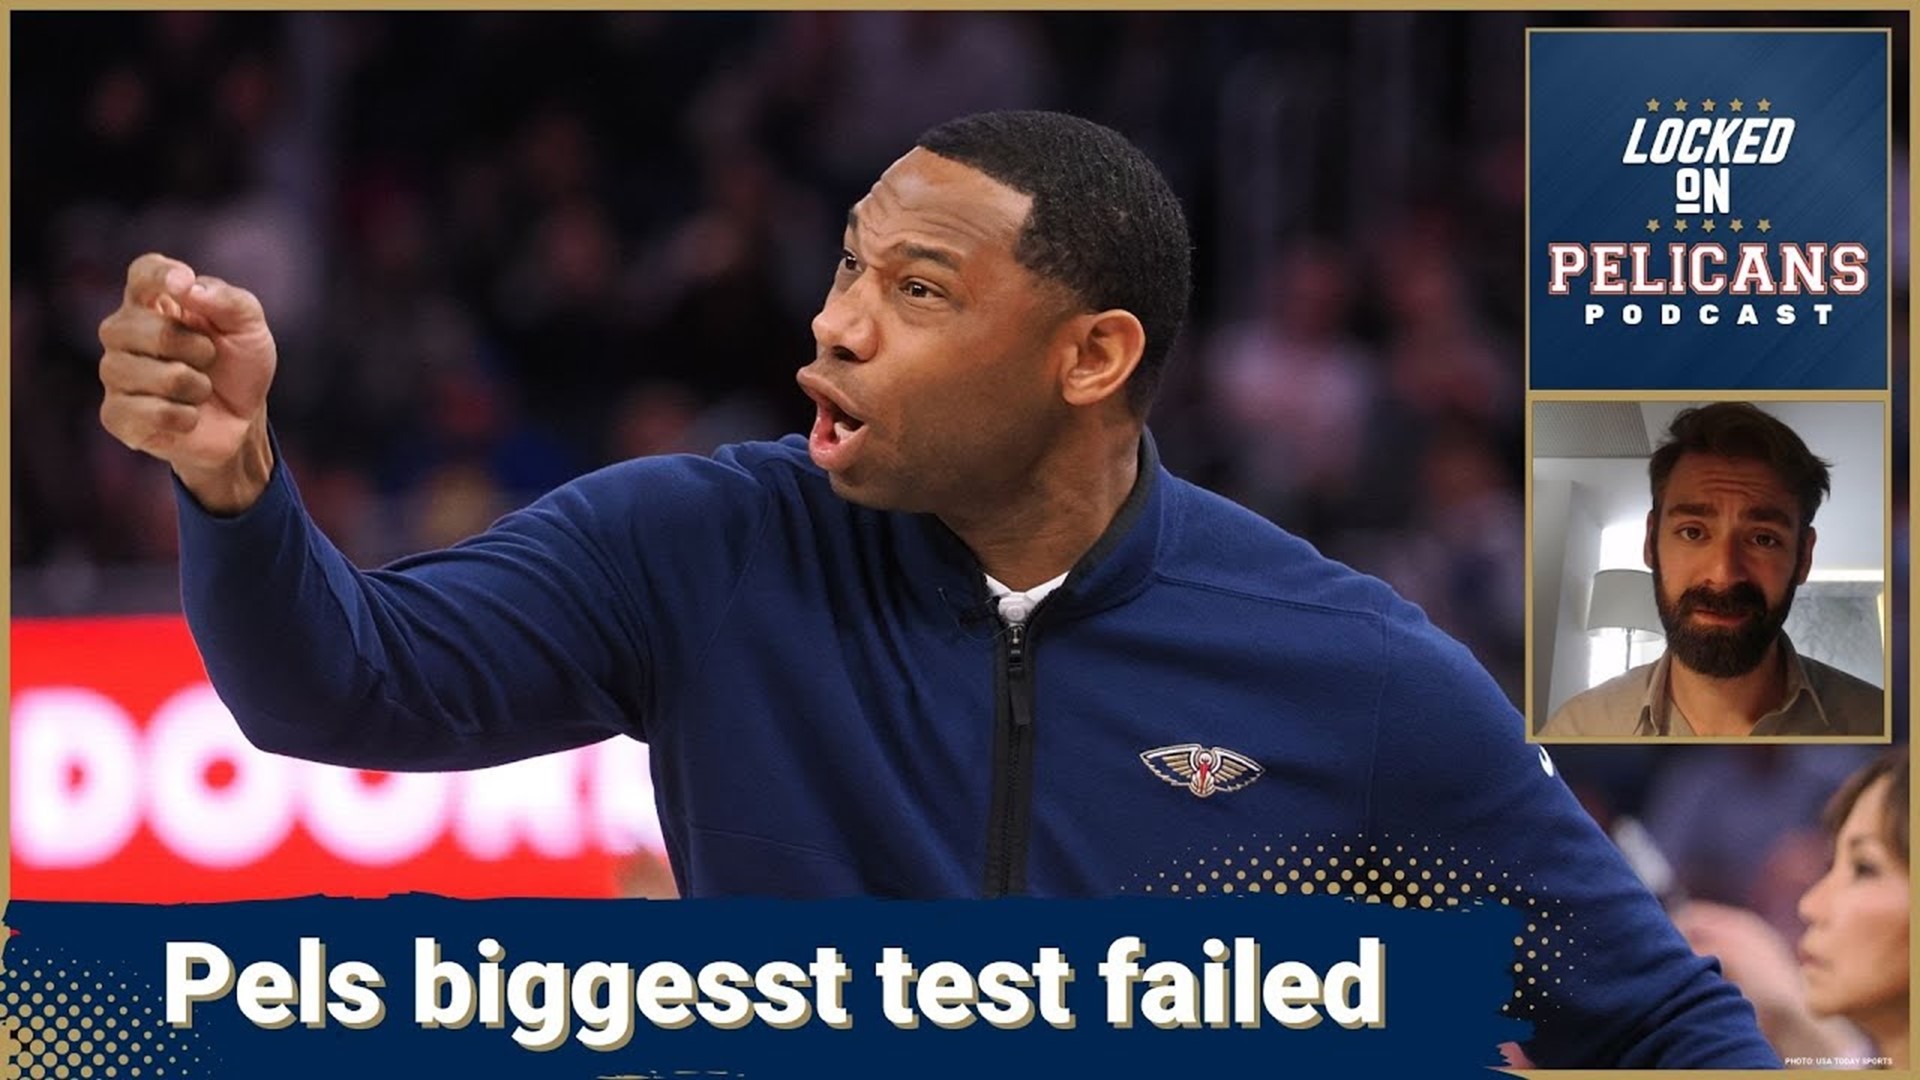 As the New Orleans Pelicans push towards the the NBA playoffs they failed their biggest test with a huge blown lead against the Golden State Warriors.